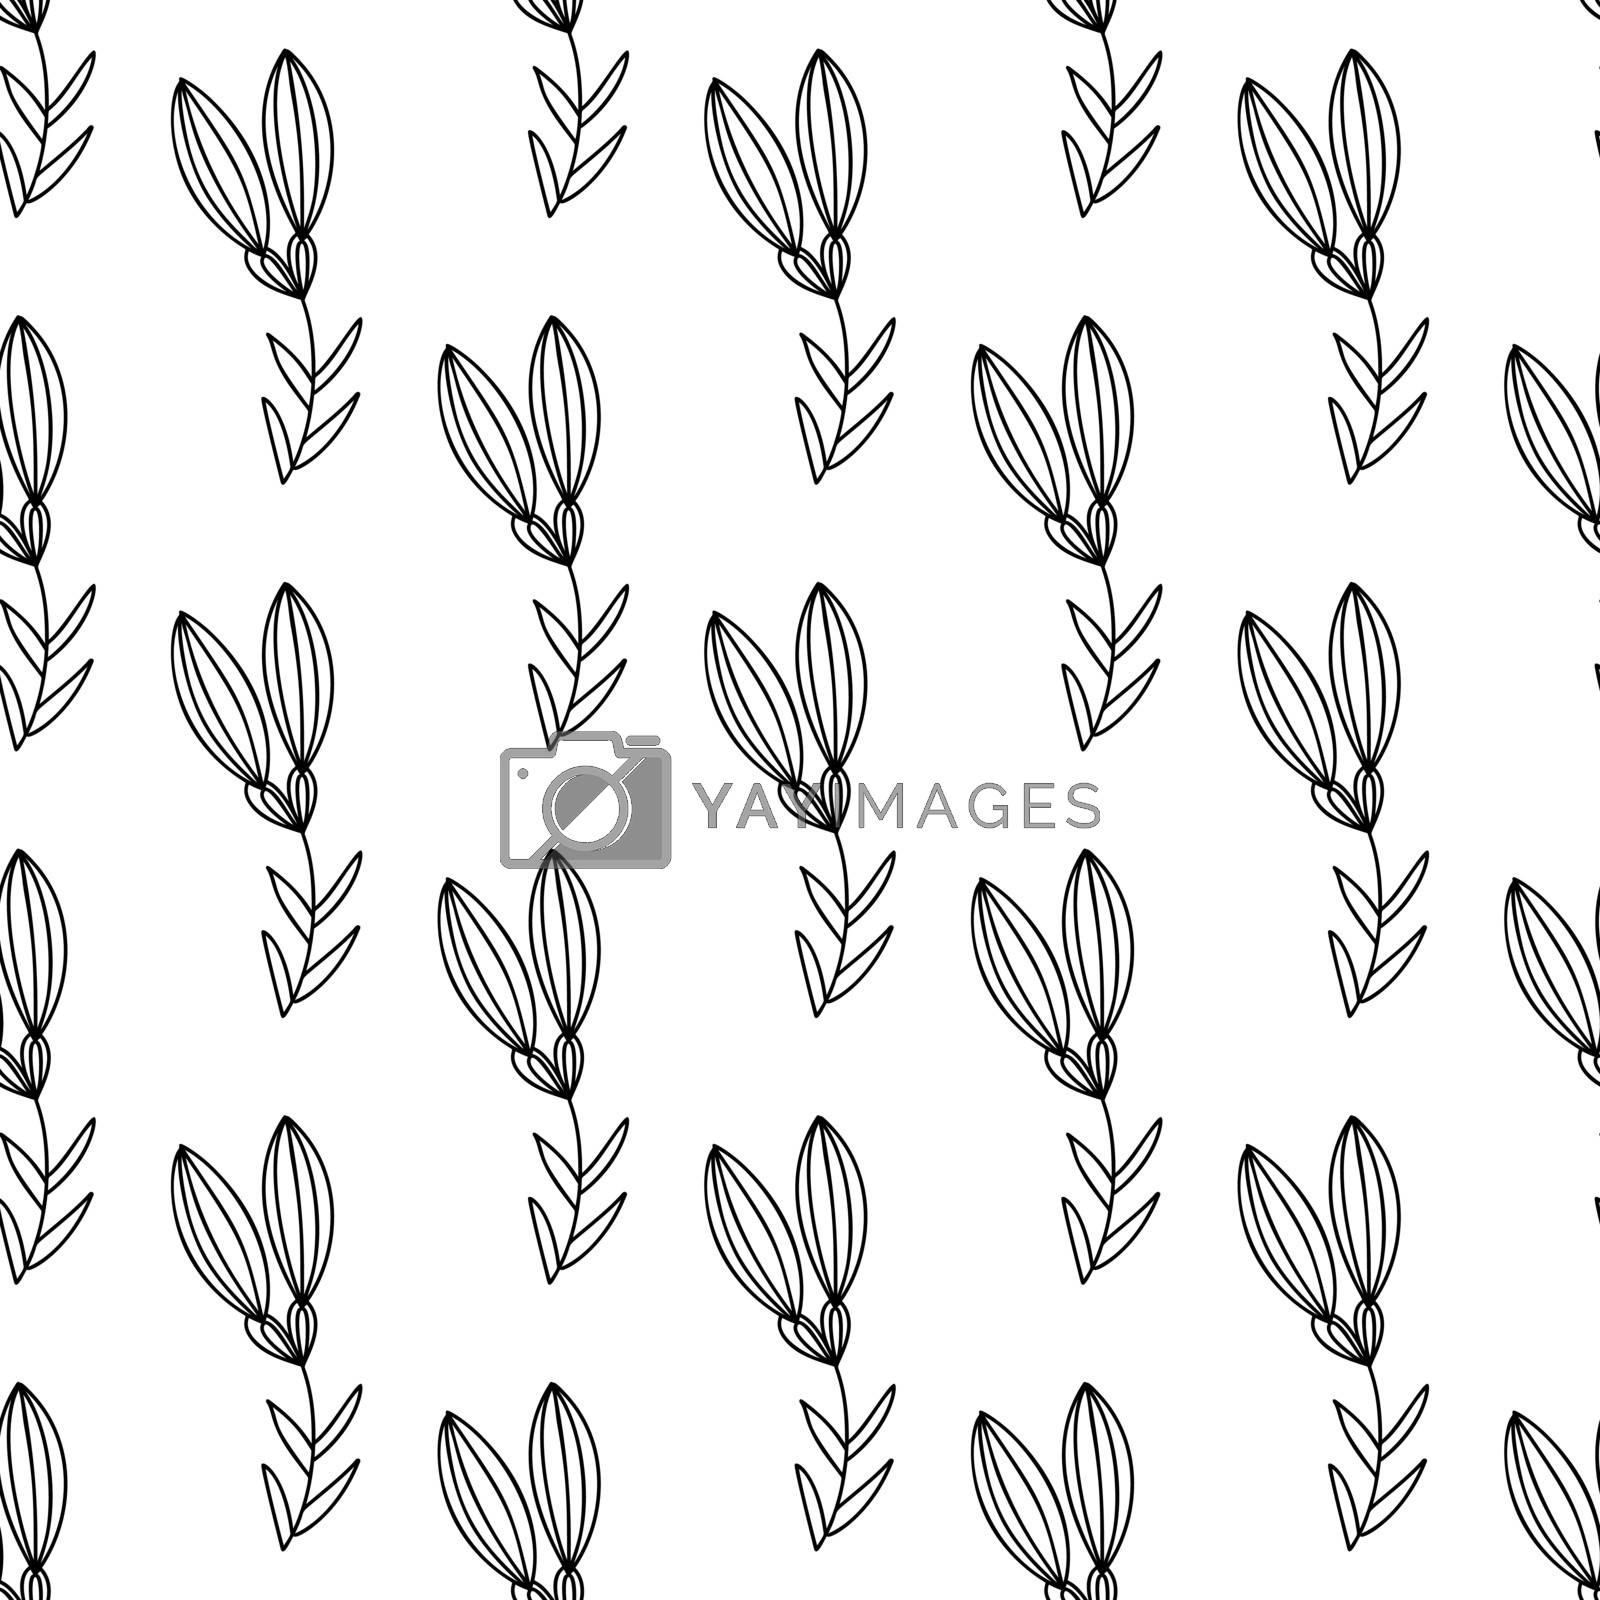 Royalty free image of Floral seamless pattern. Isolated on white background. Vector stock illustration. by anna_artist